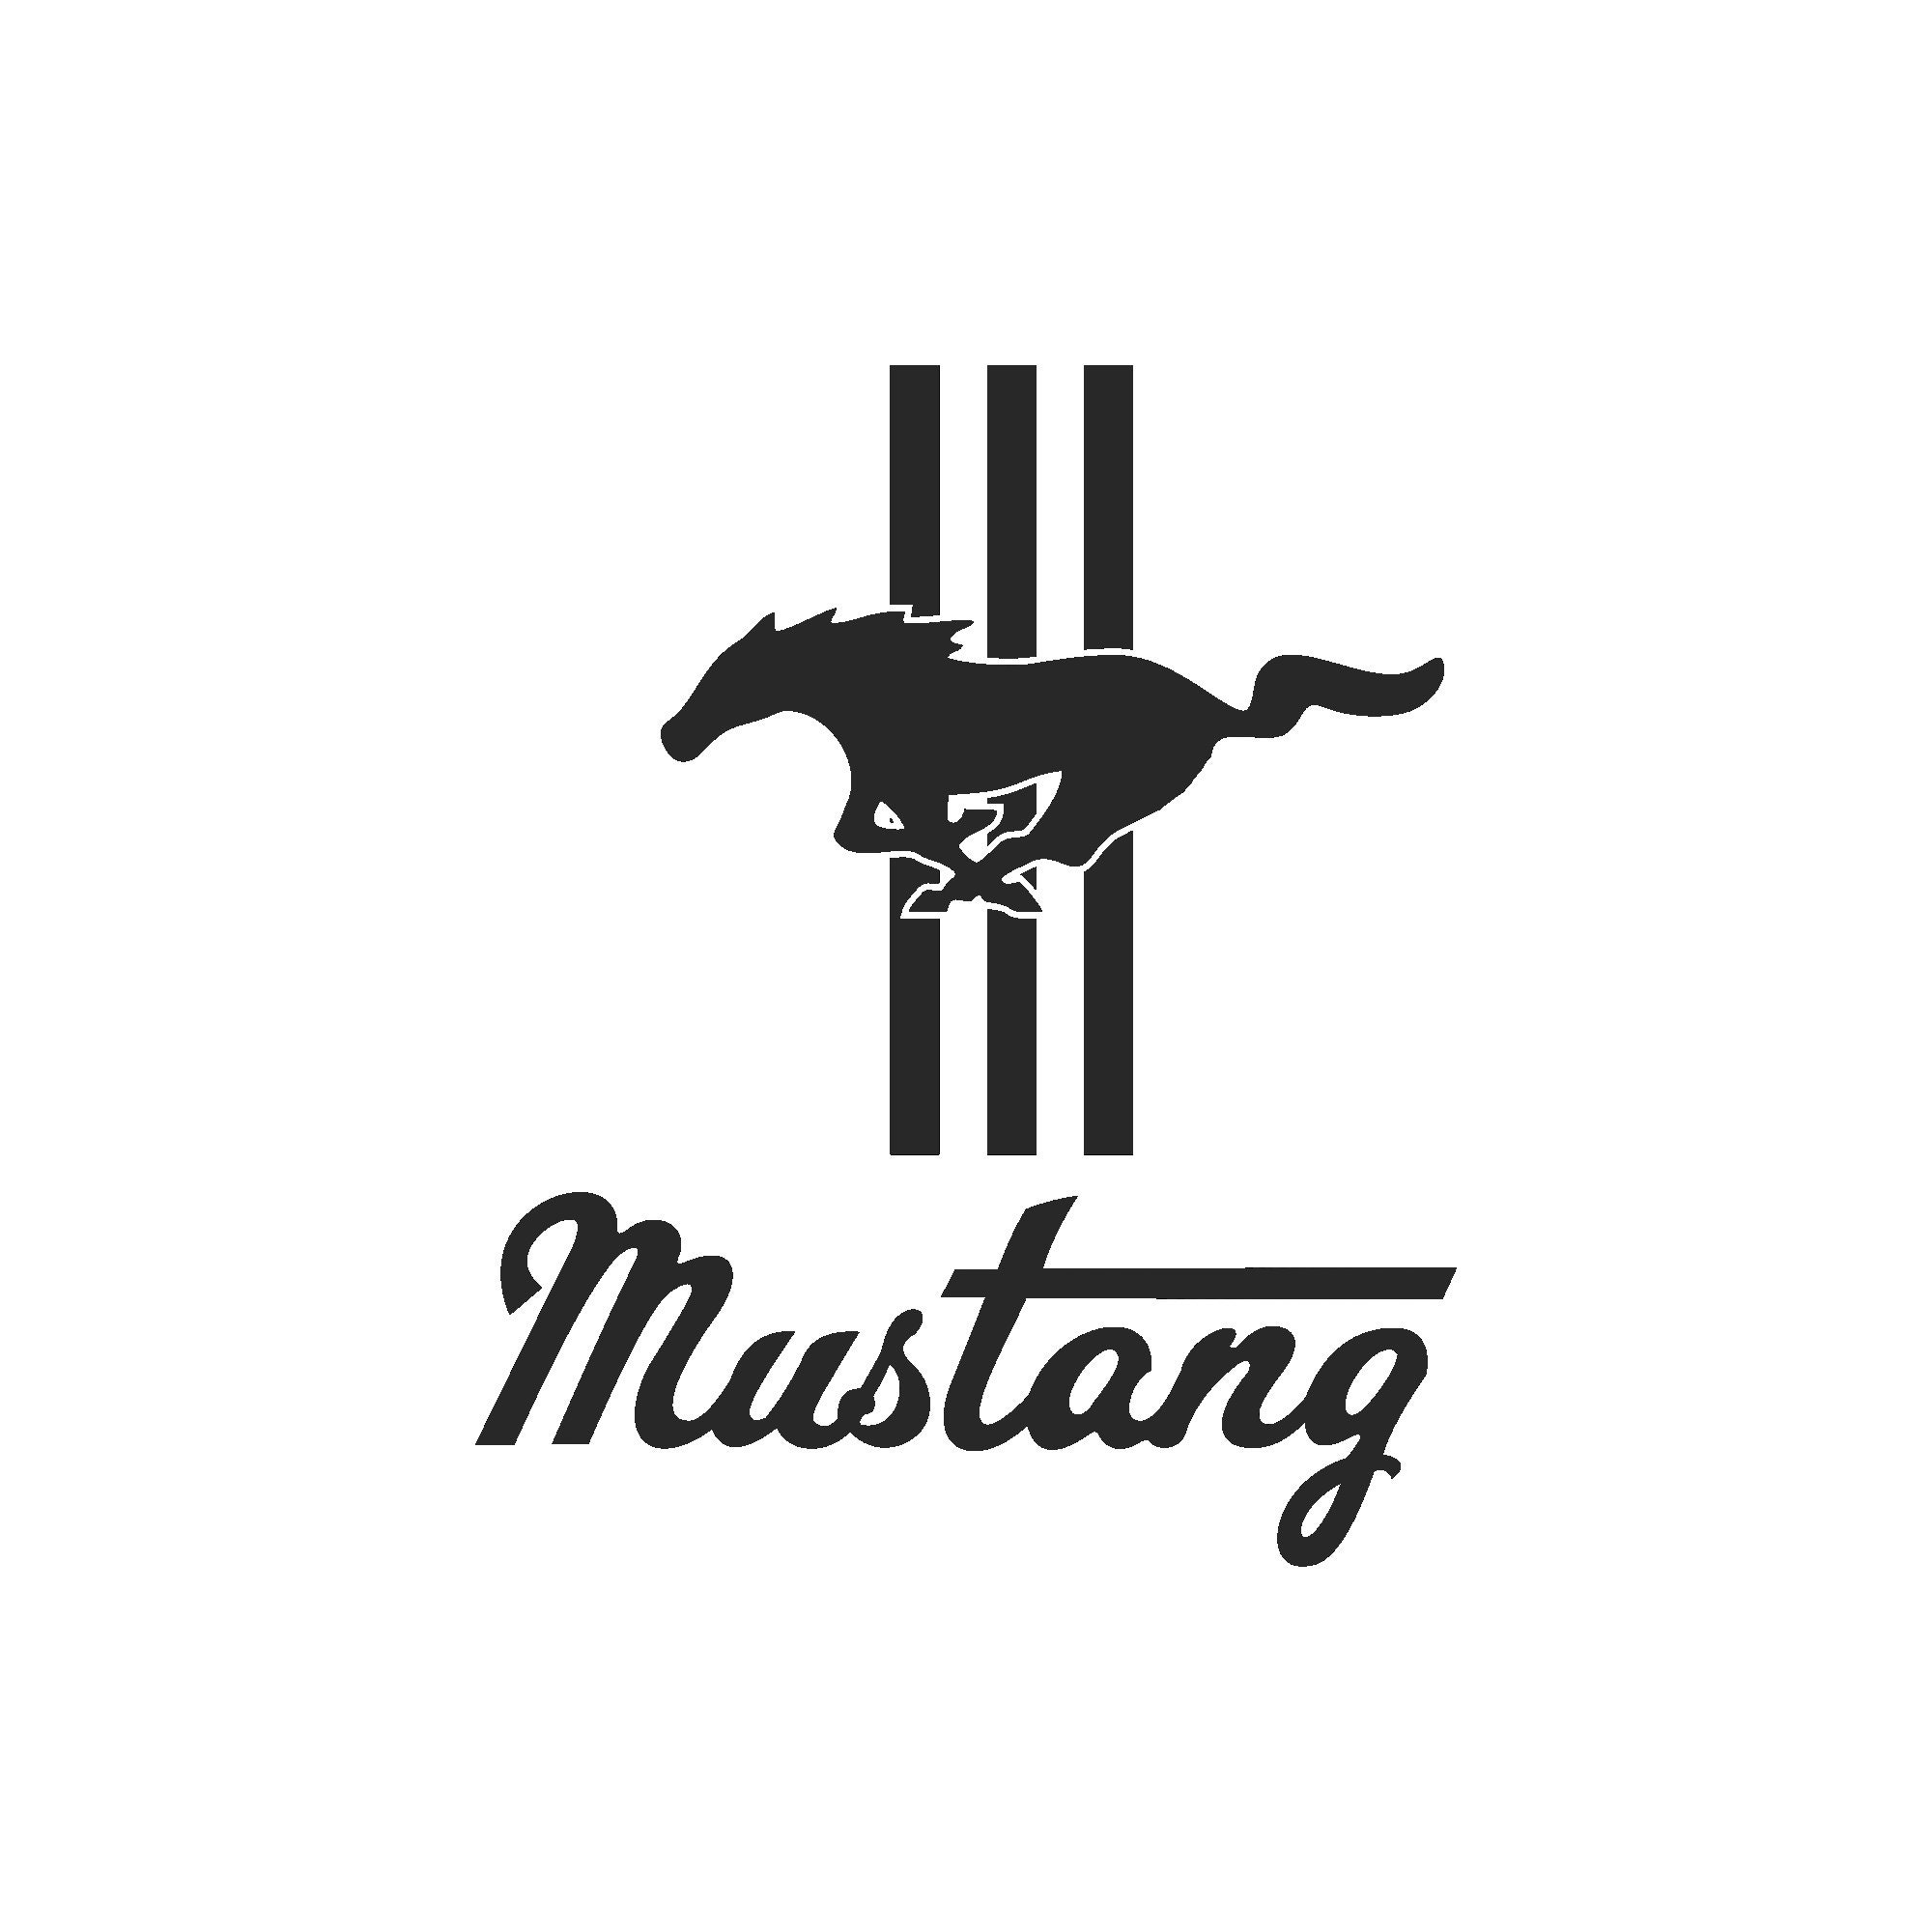 Instant Download / Cut File / Ford Mustang SVG - Etsy